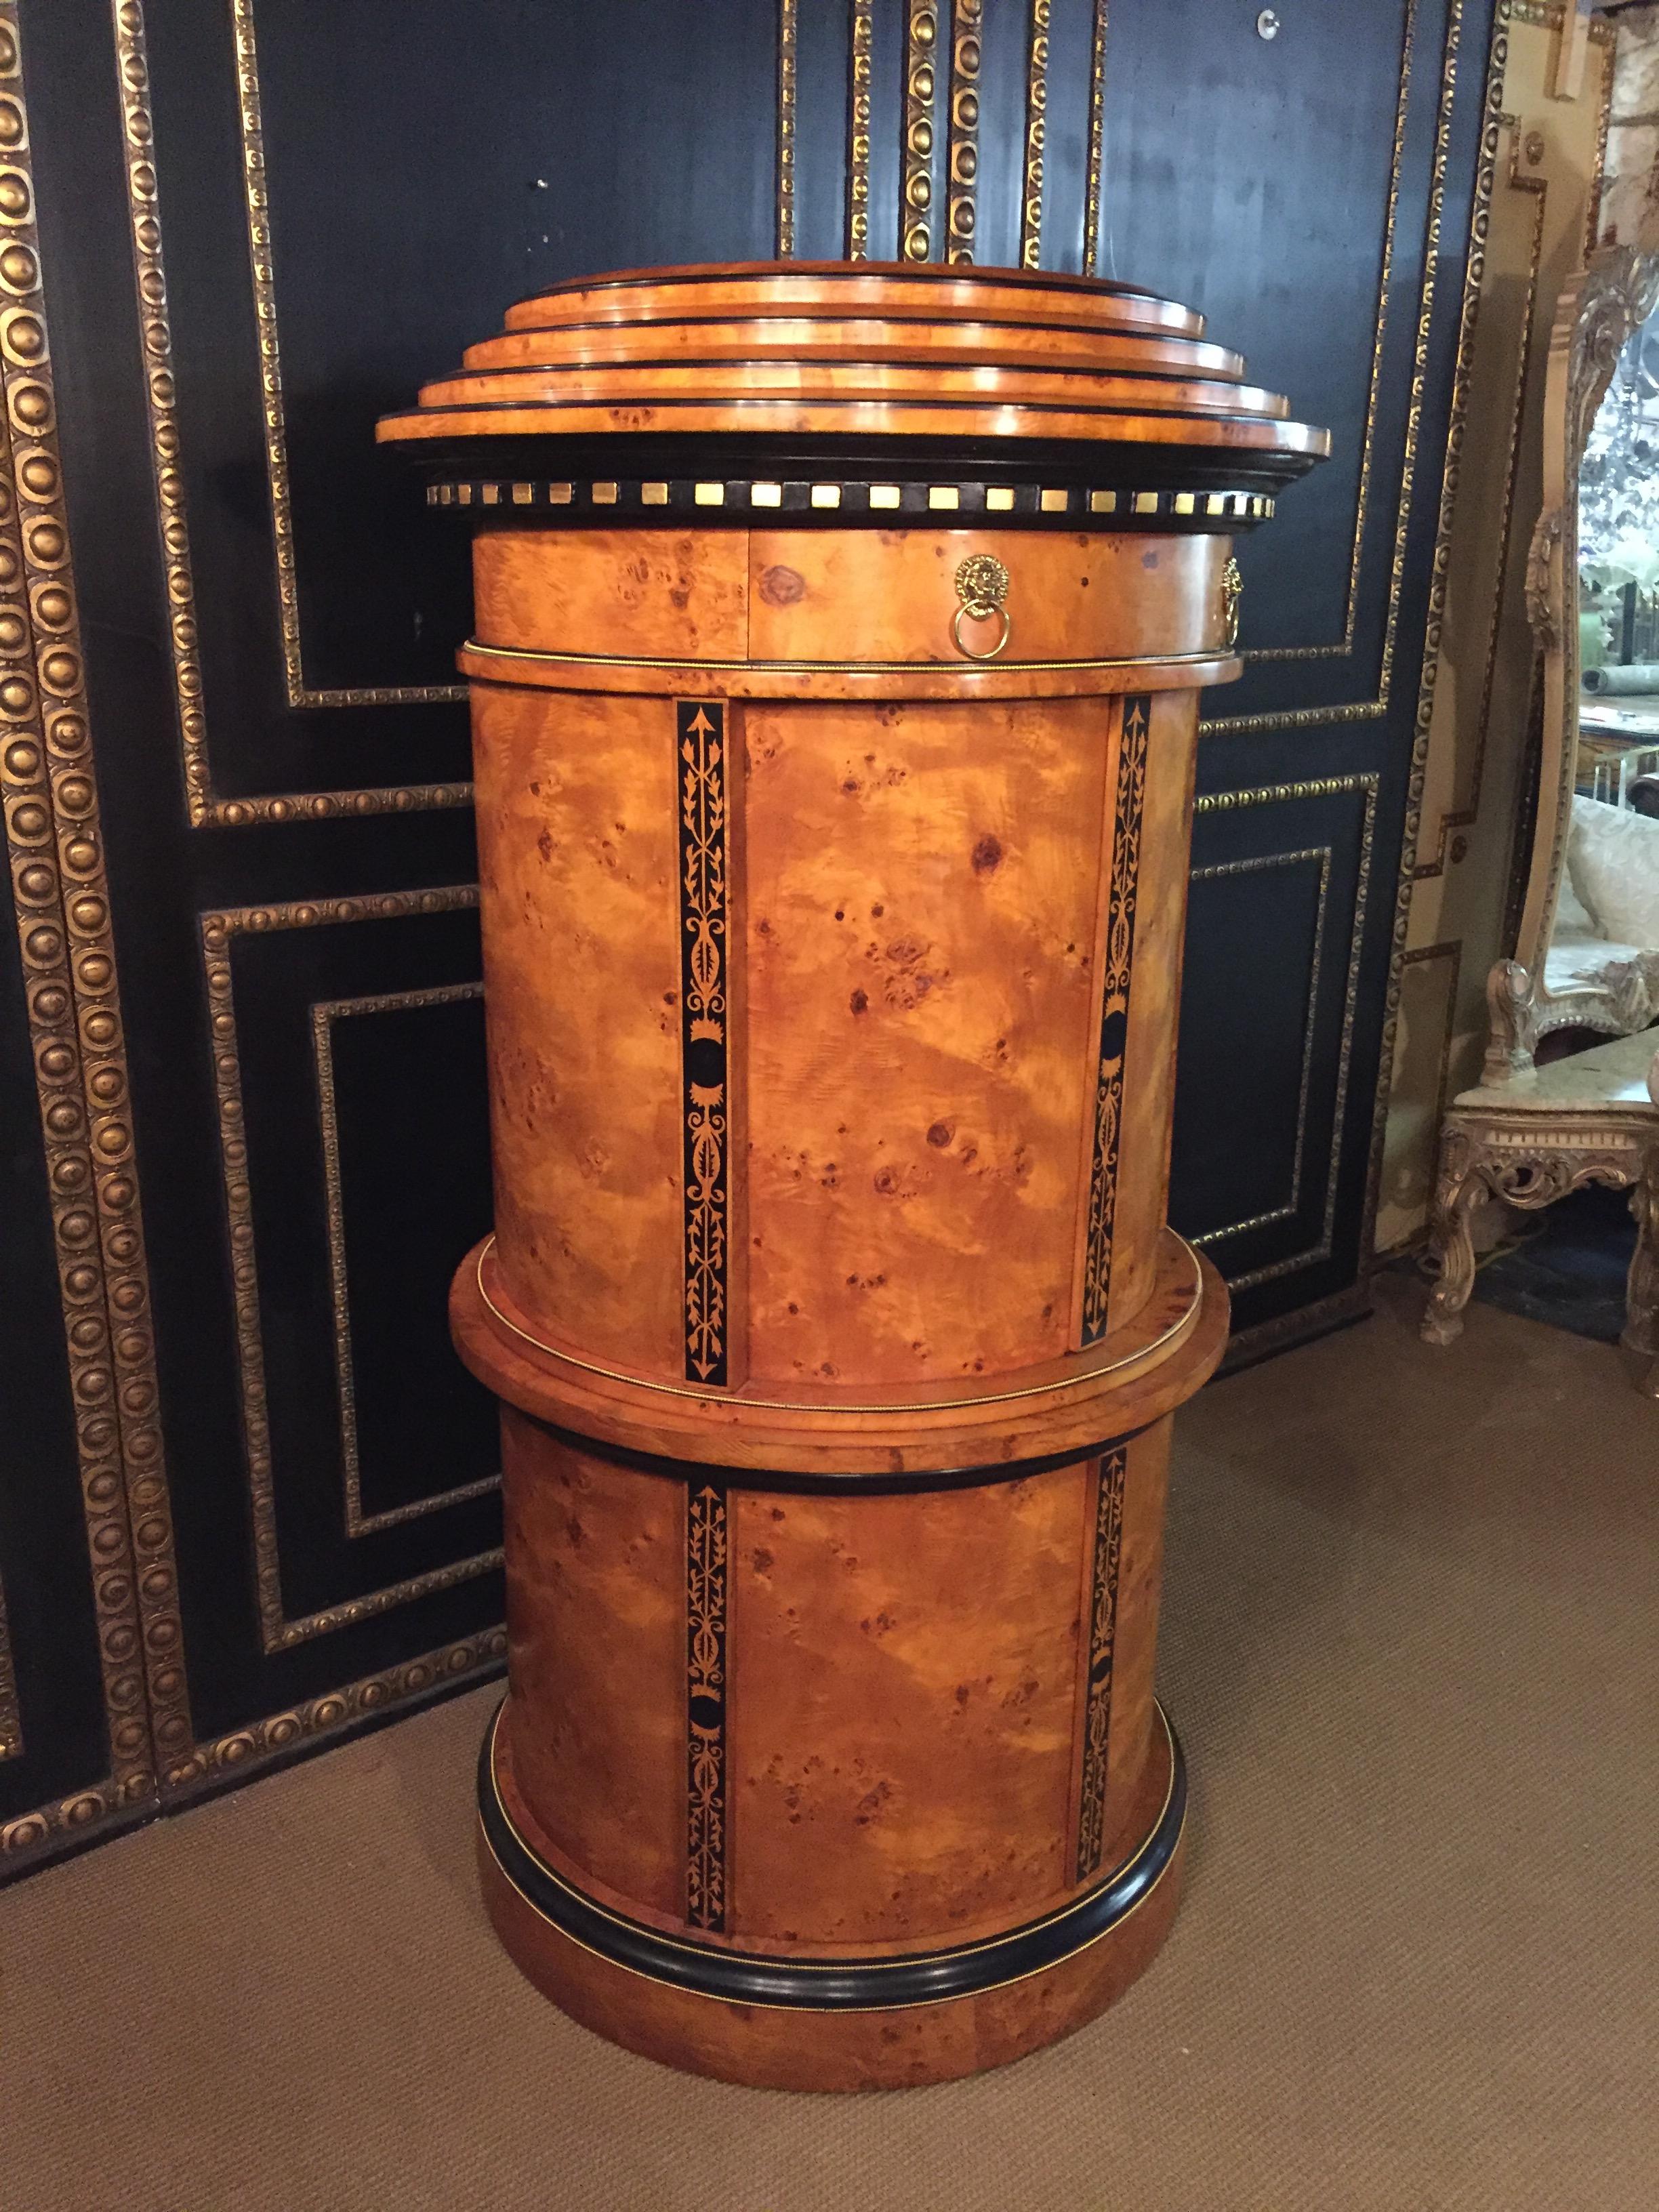 The highest artist work.
Aristocratic secretaire of Vienna Biedermeier after Johann Härle, 1813. Highly valuable bird’s-eye maple root veneer on solid pinewood, partially ebonized, crested with classicist maple core.